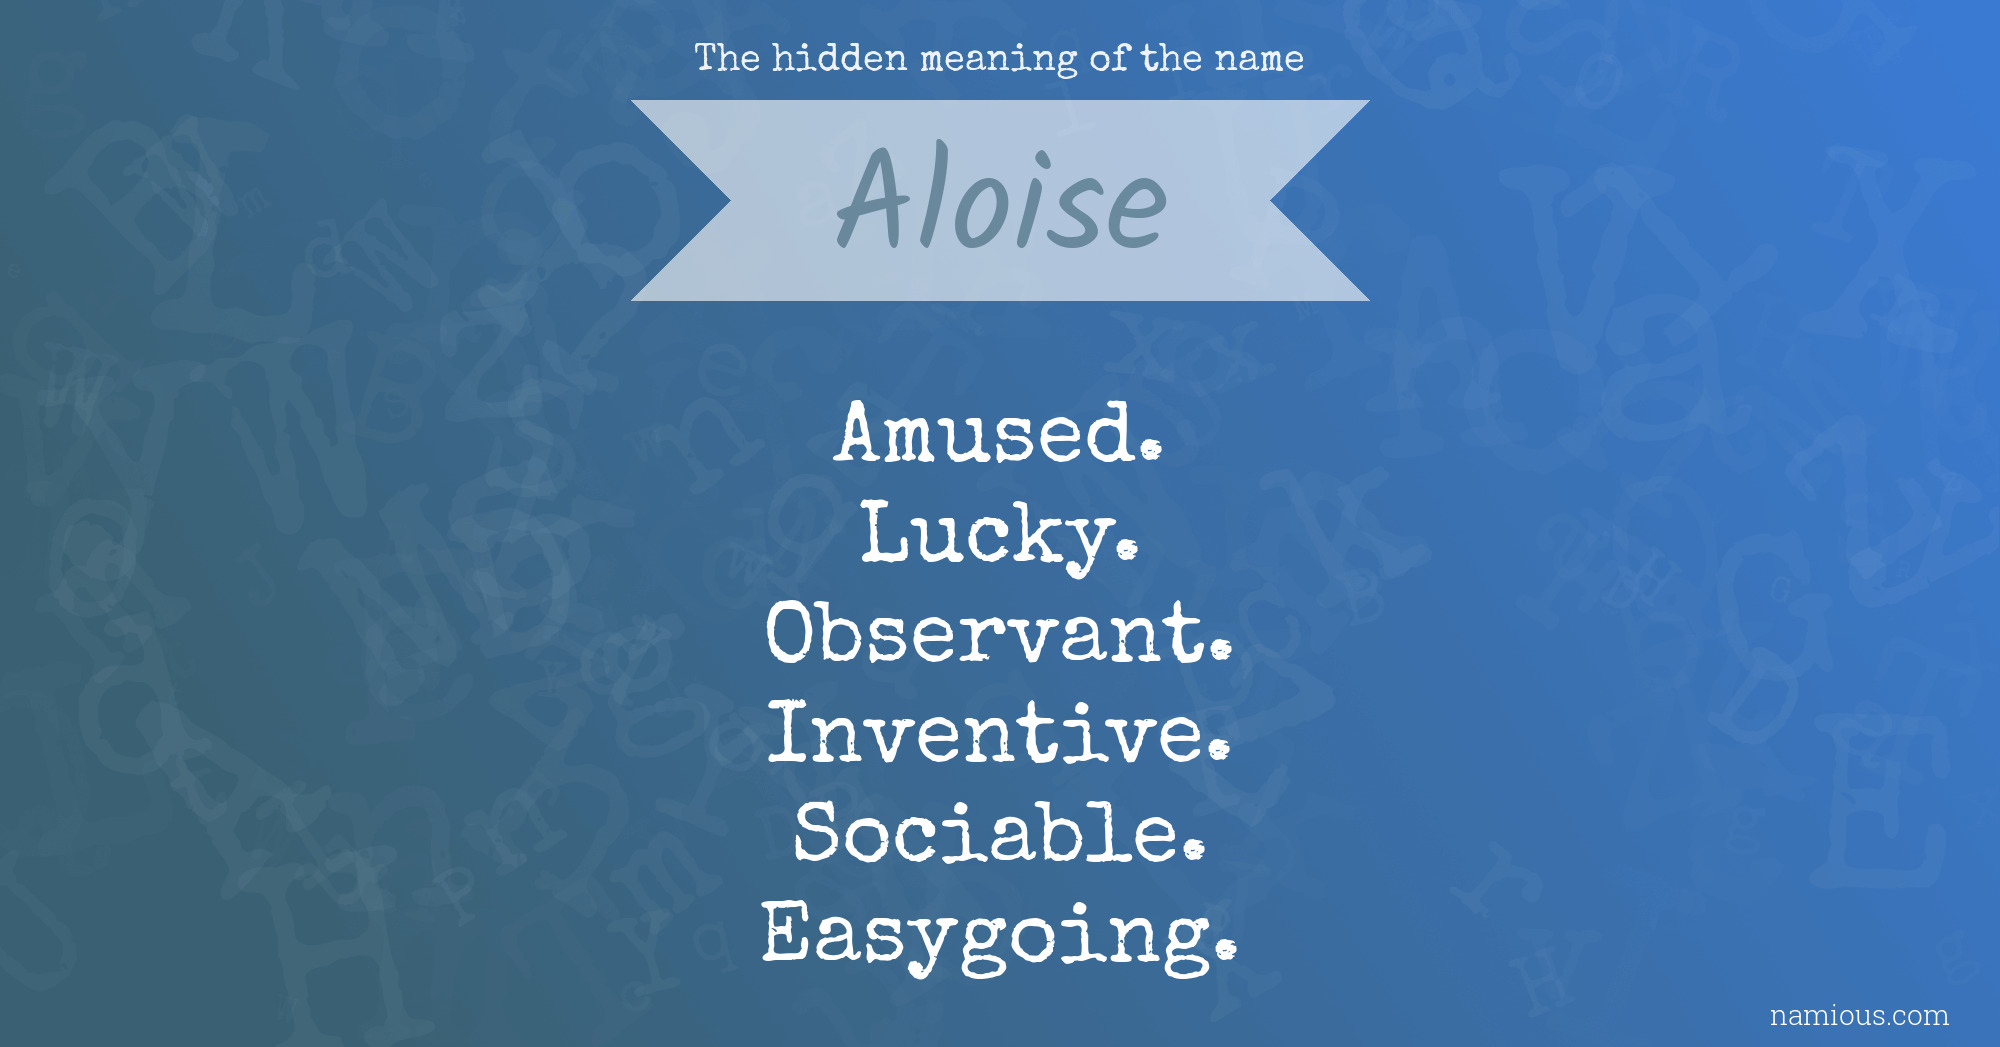 The hidden meaning of the name Aloise